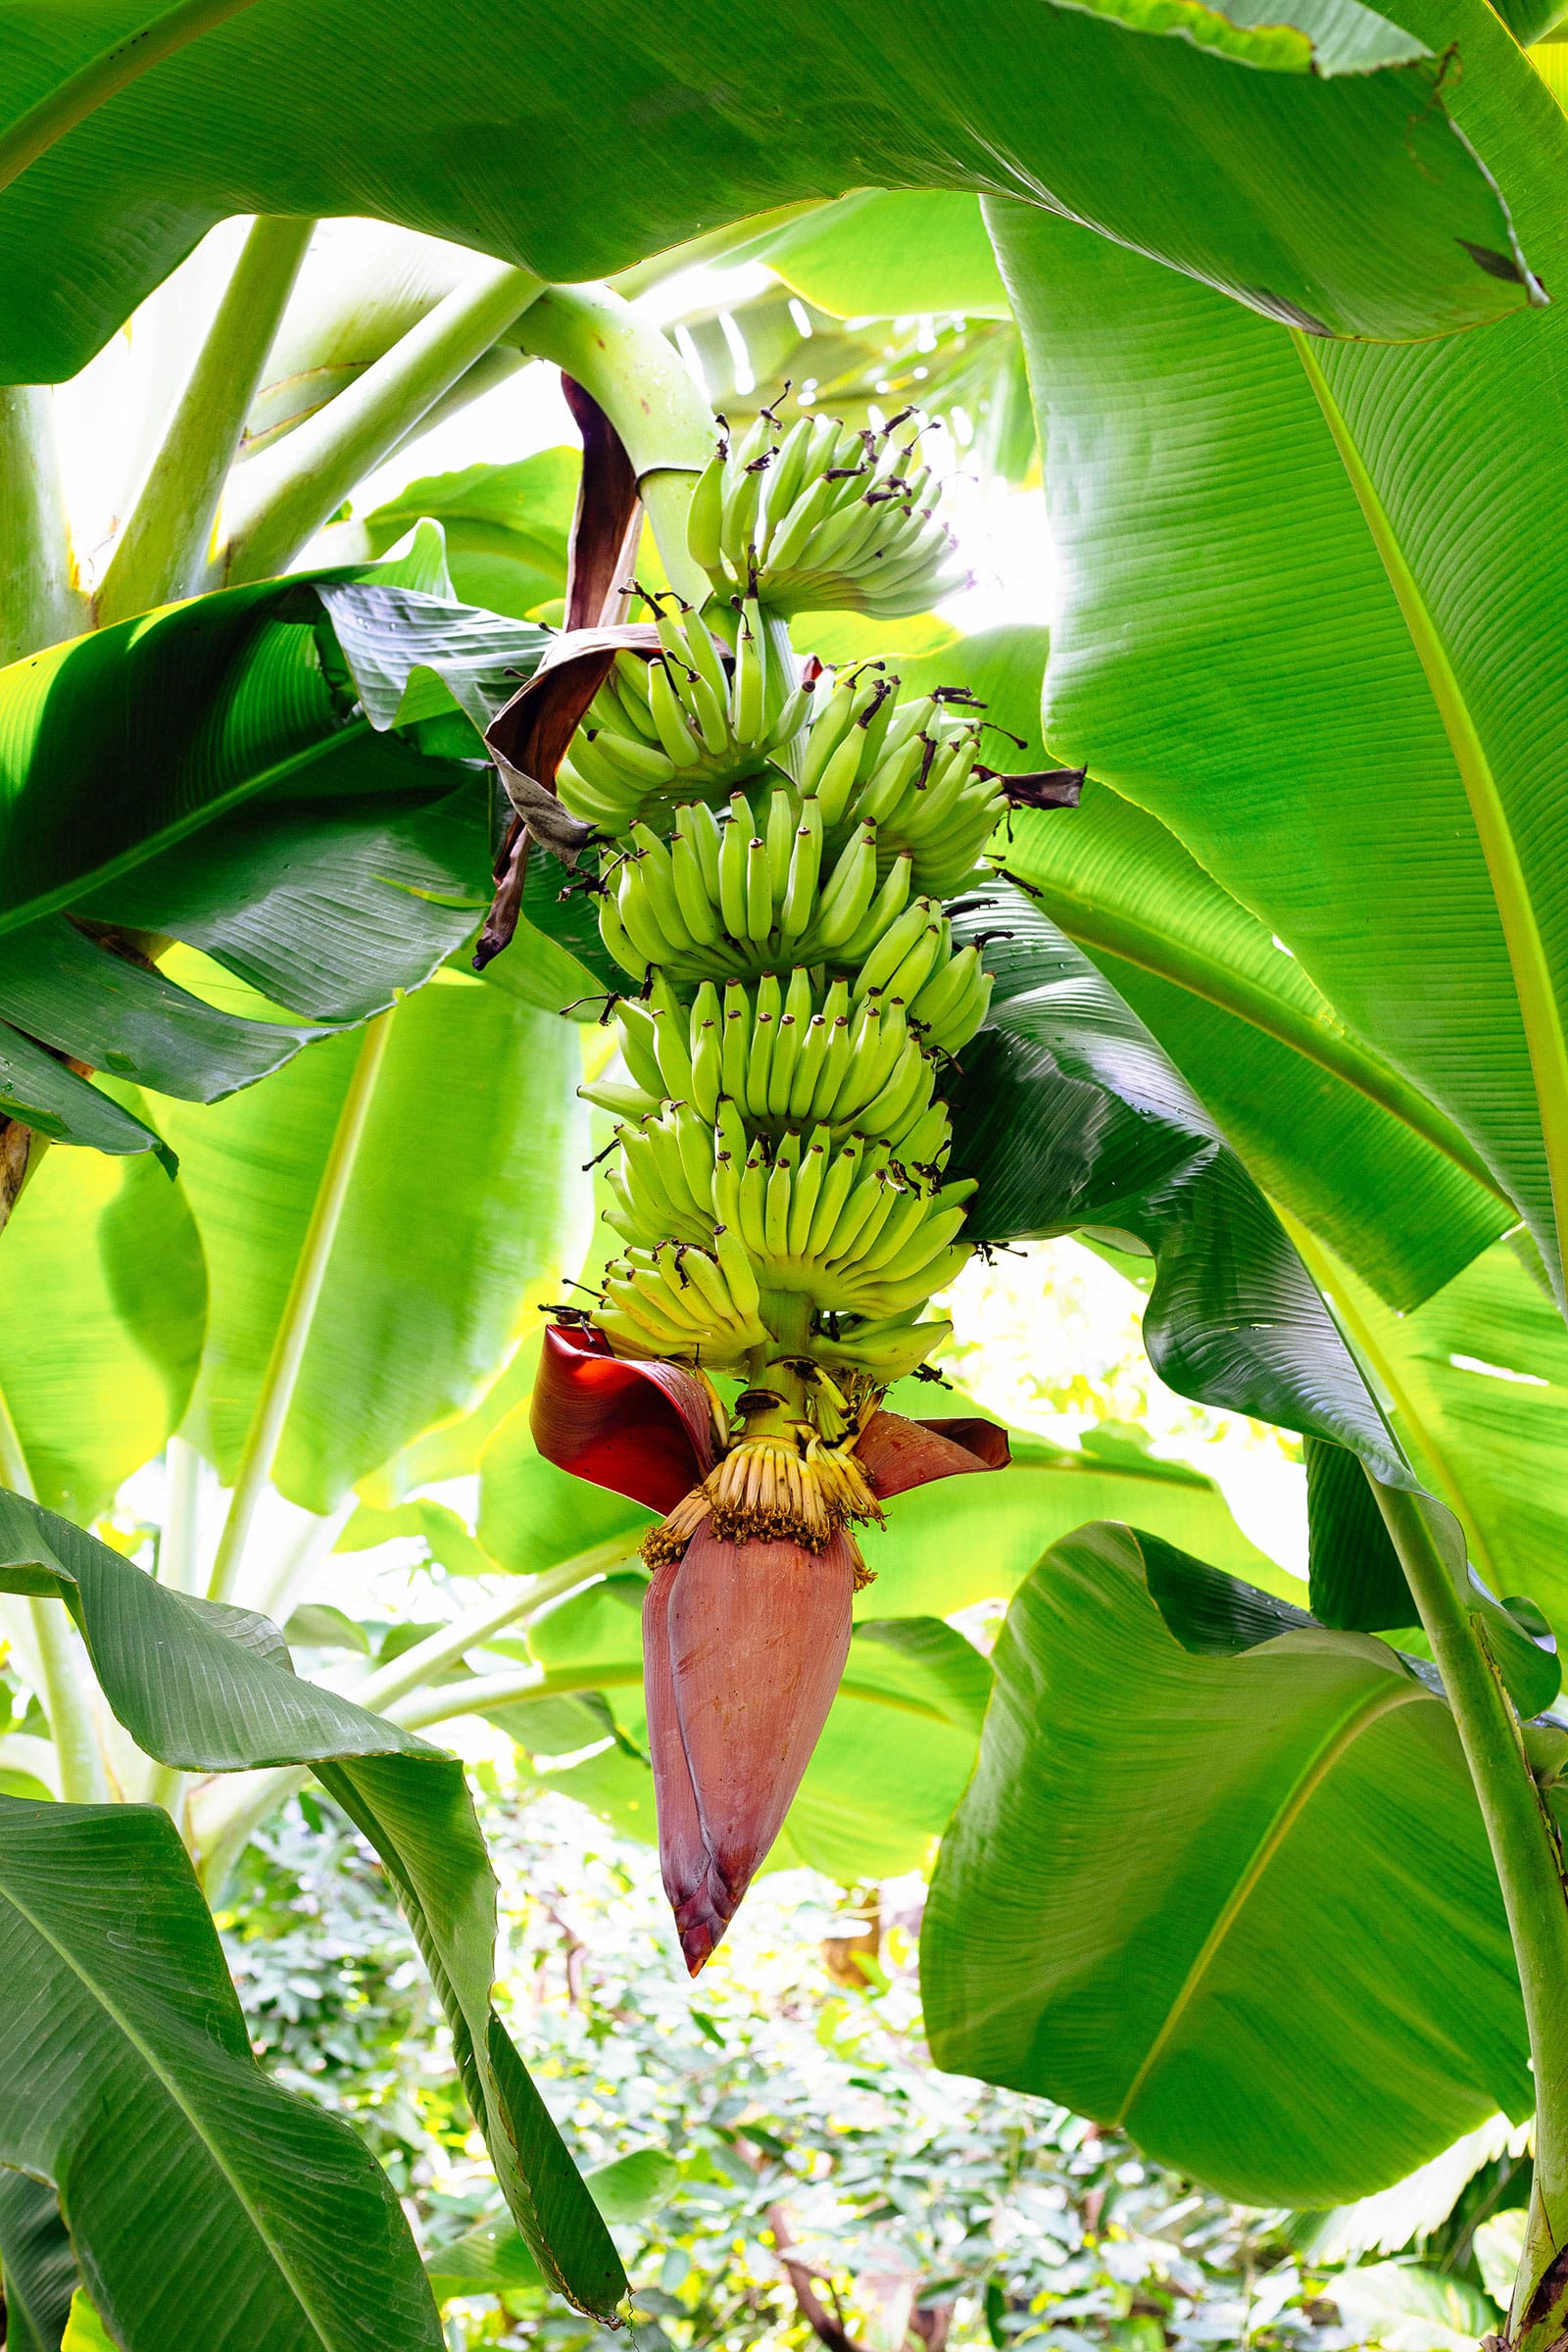 A large bunch of bananas on a stalk with a banana blossom on the end